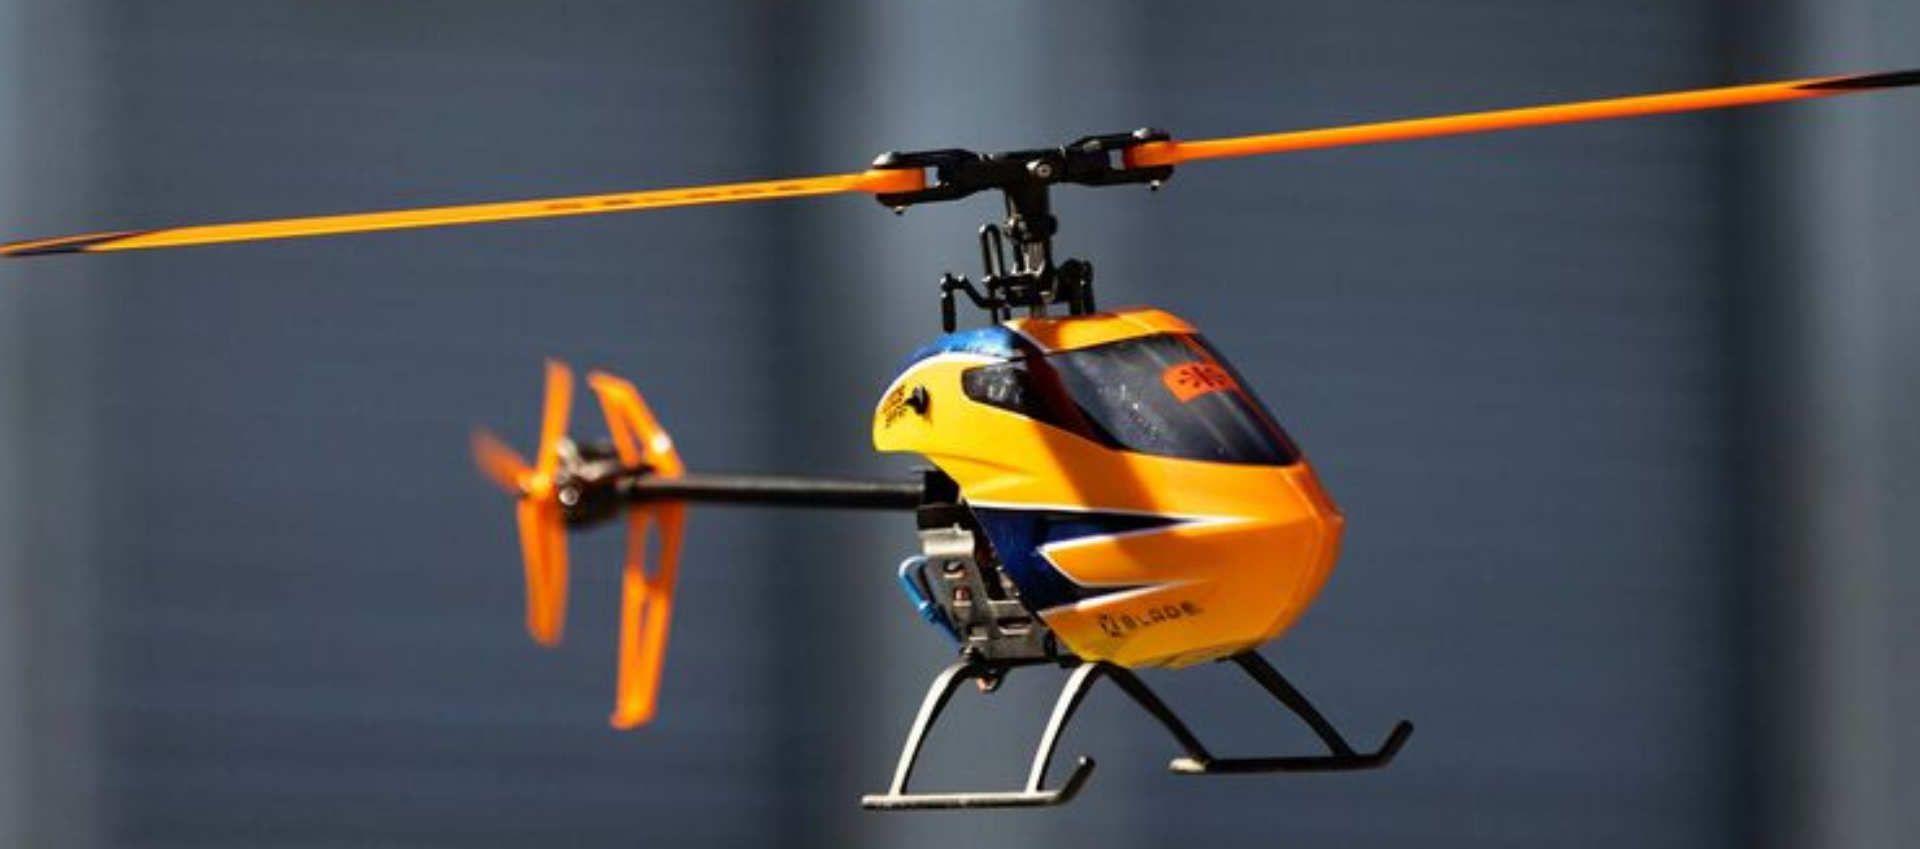 Most Powerful Rc Helicopter: Comparing Powerful Blade RC Helicopter Models